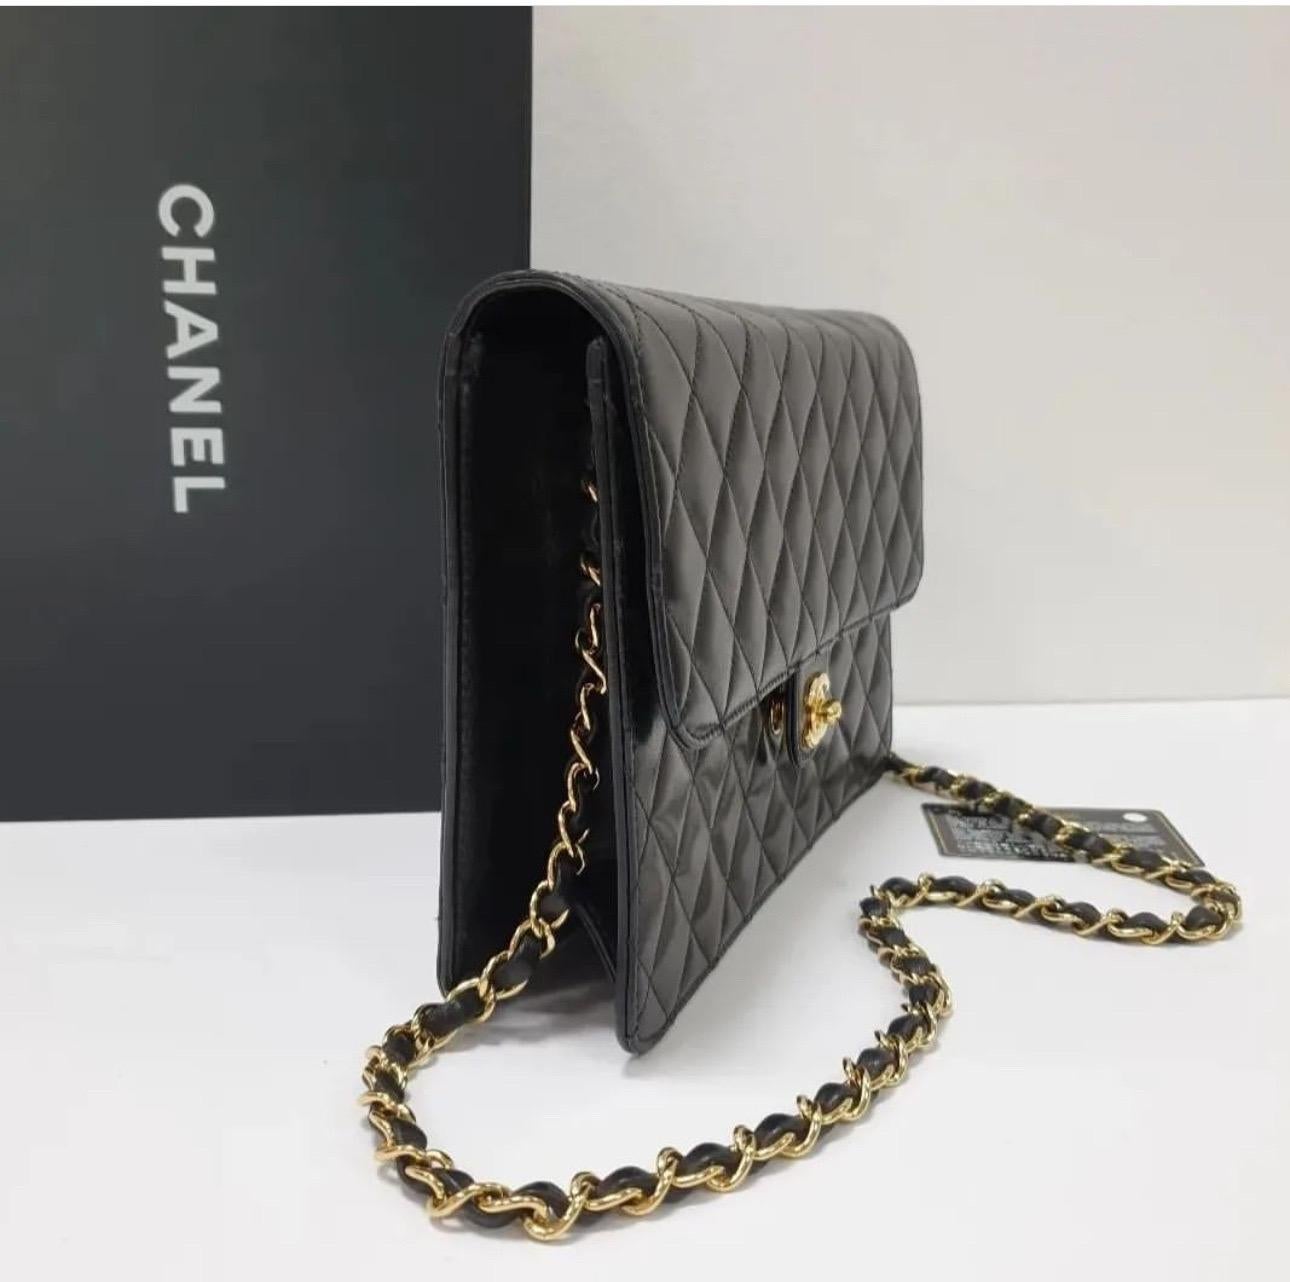 The Chanel Black Lambskin Quilted Classic Flap Bag is the perfect accessory to complete any look! It is a timeless, stylish and sophisticated bag that elevates every look.

This bag is crafted from quilted lambskin leather and is finished with